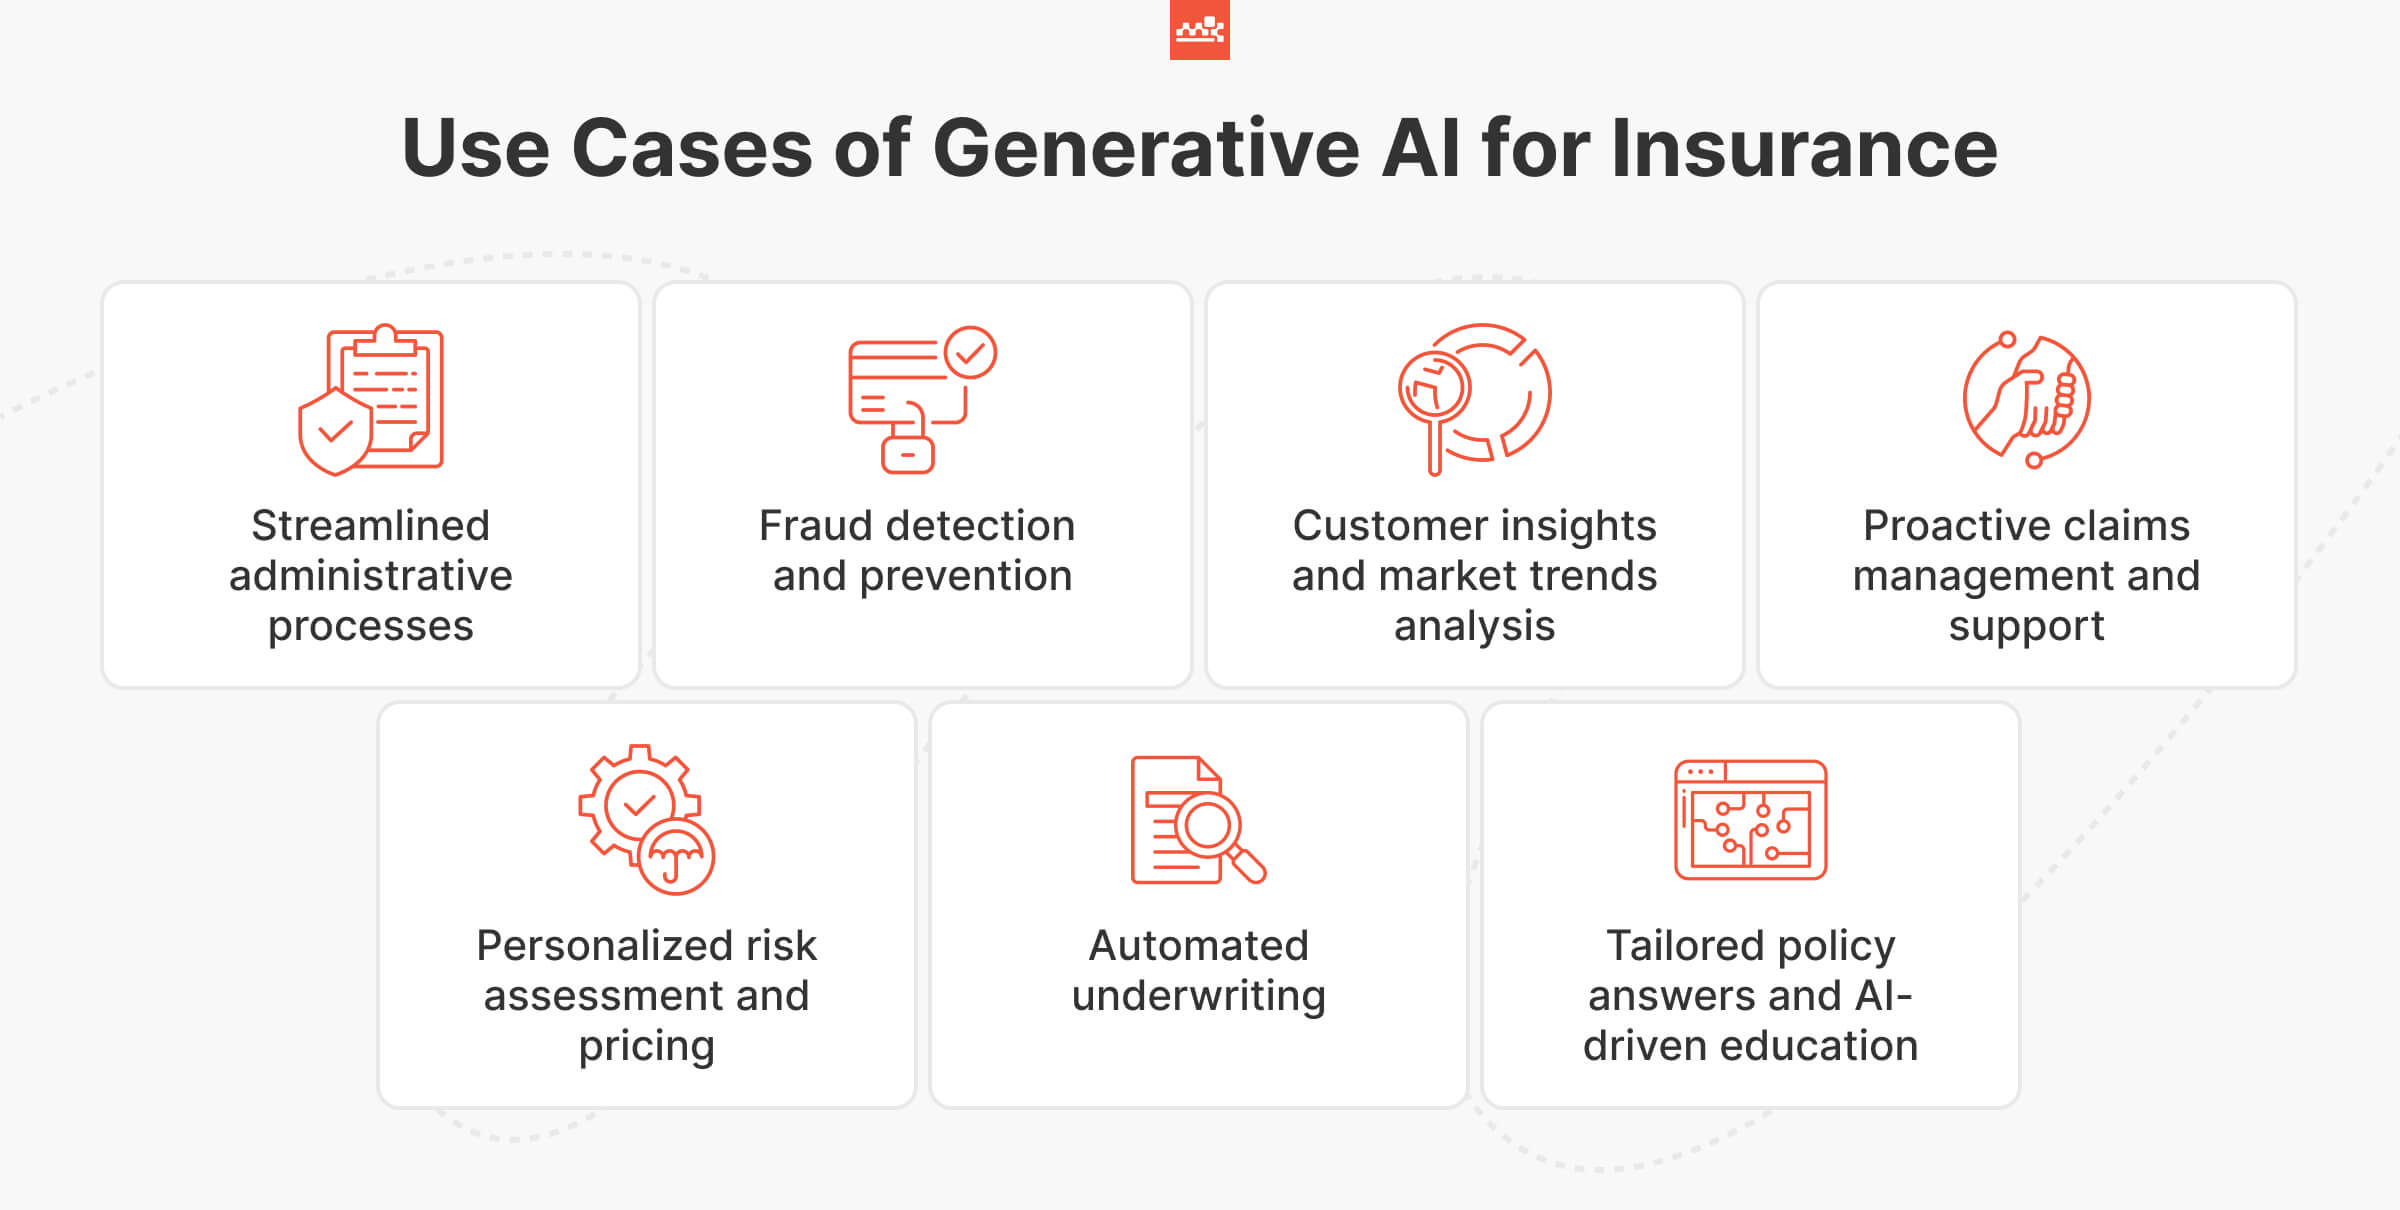 Use Cases of Generative AI for Insurance